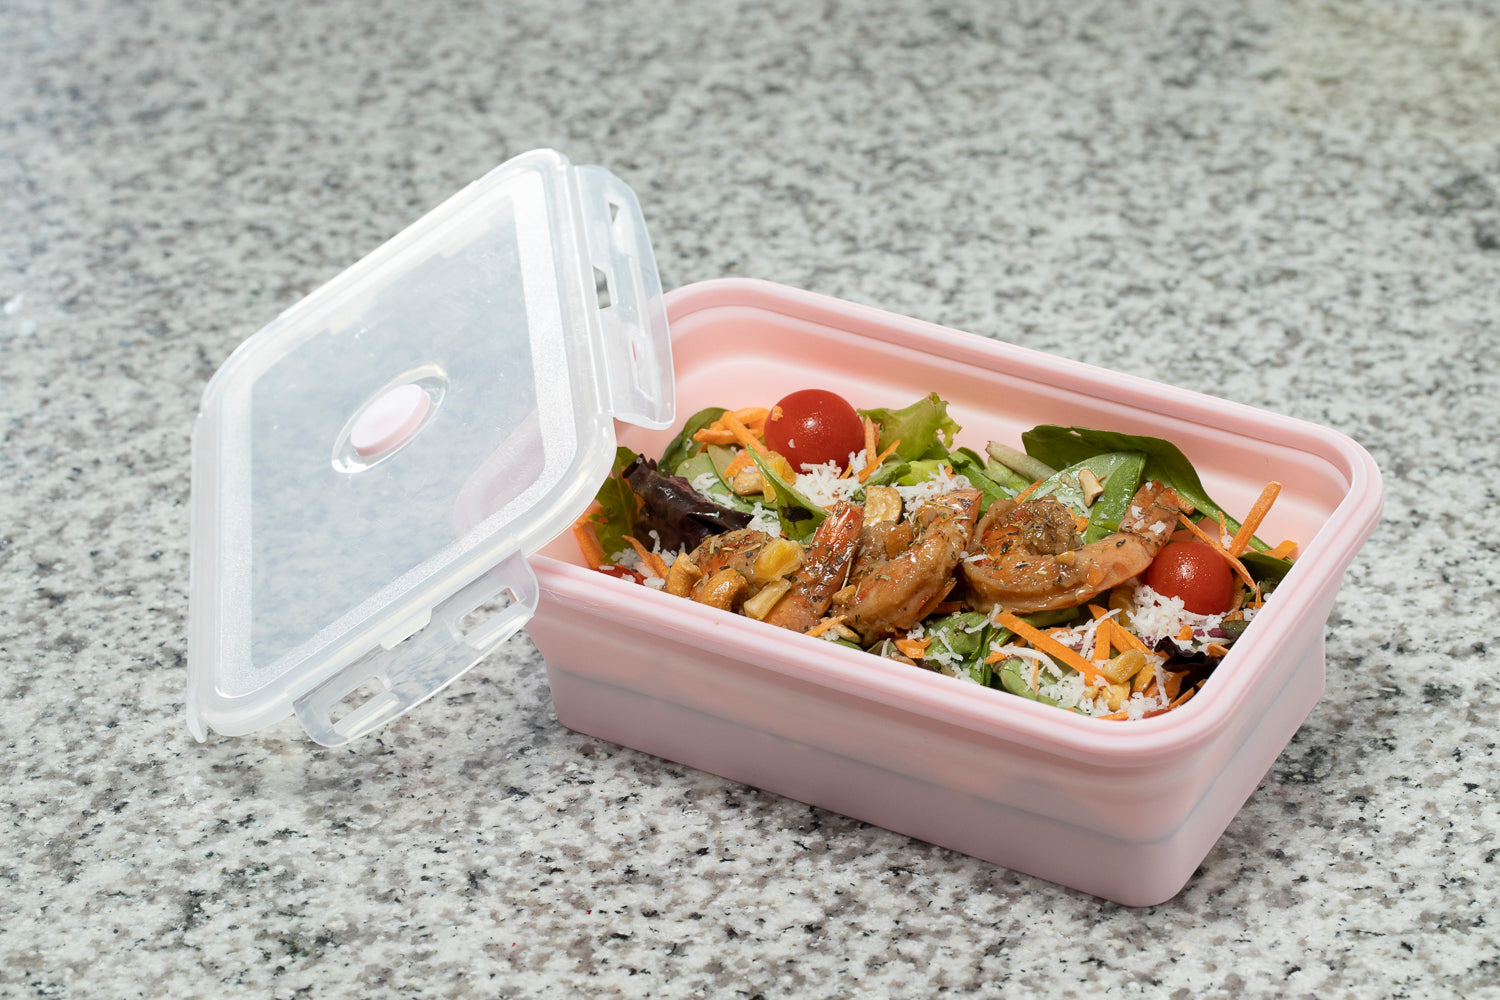 Airtight Food Storage Containers With Lids, Plastic Bpa Free